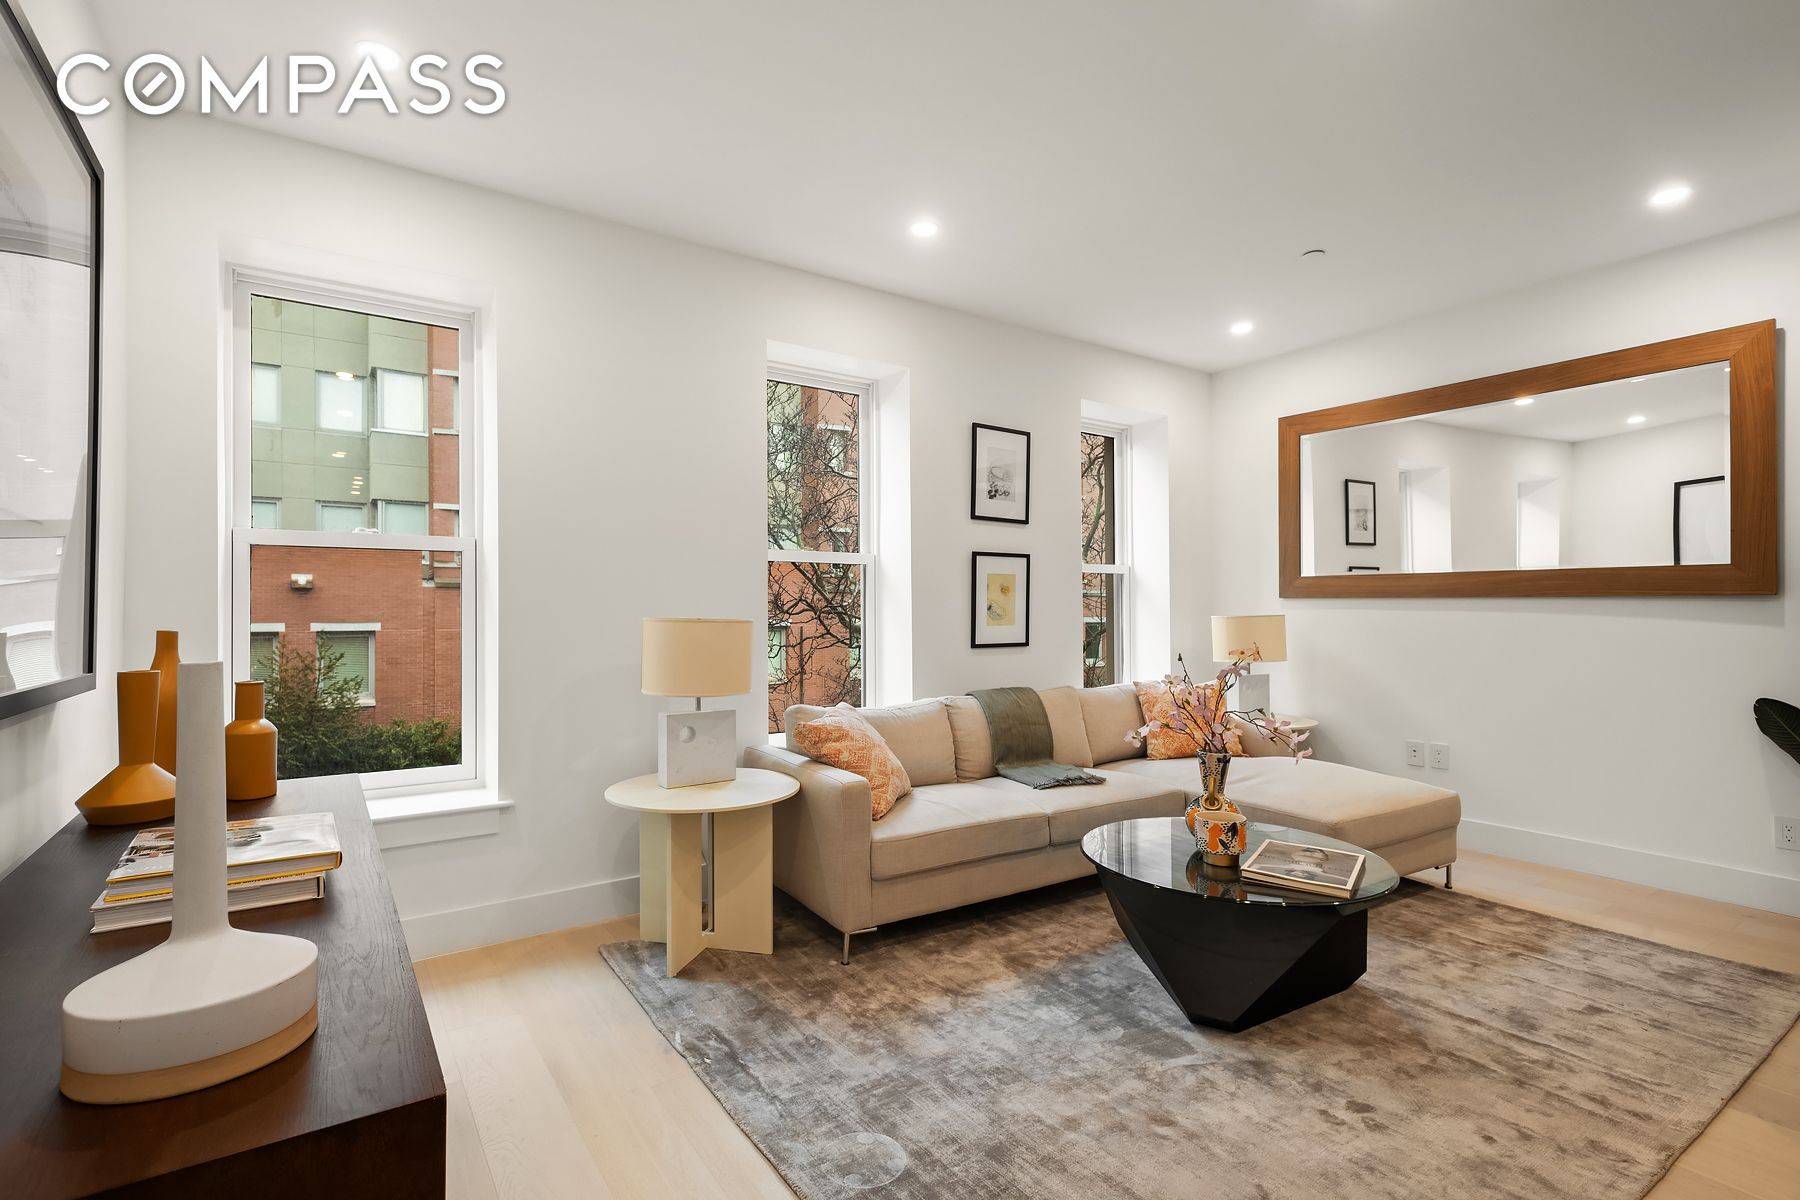 Introducing 494 7 Street, a brand new three unit boutique condominium conversion situated perfectly in Park Slope.